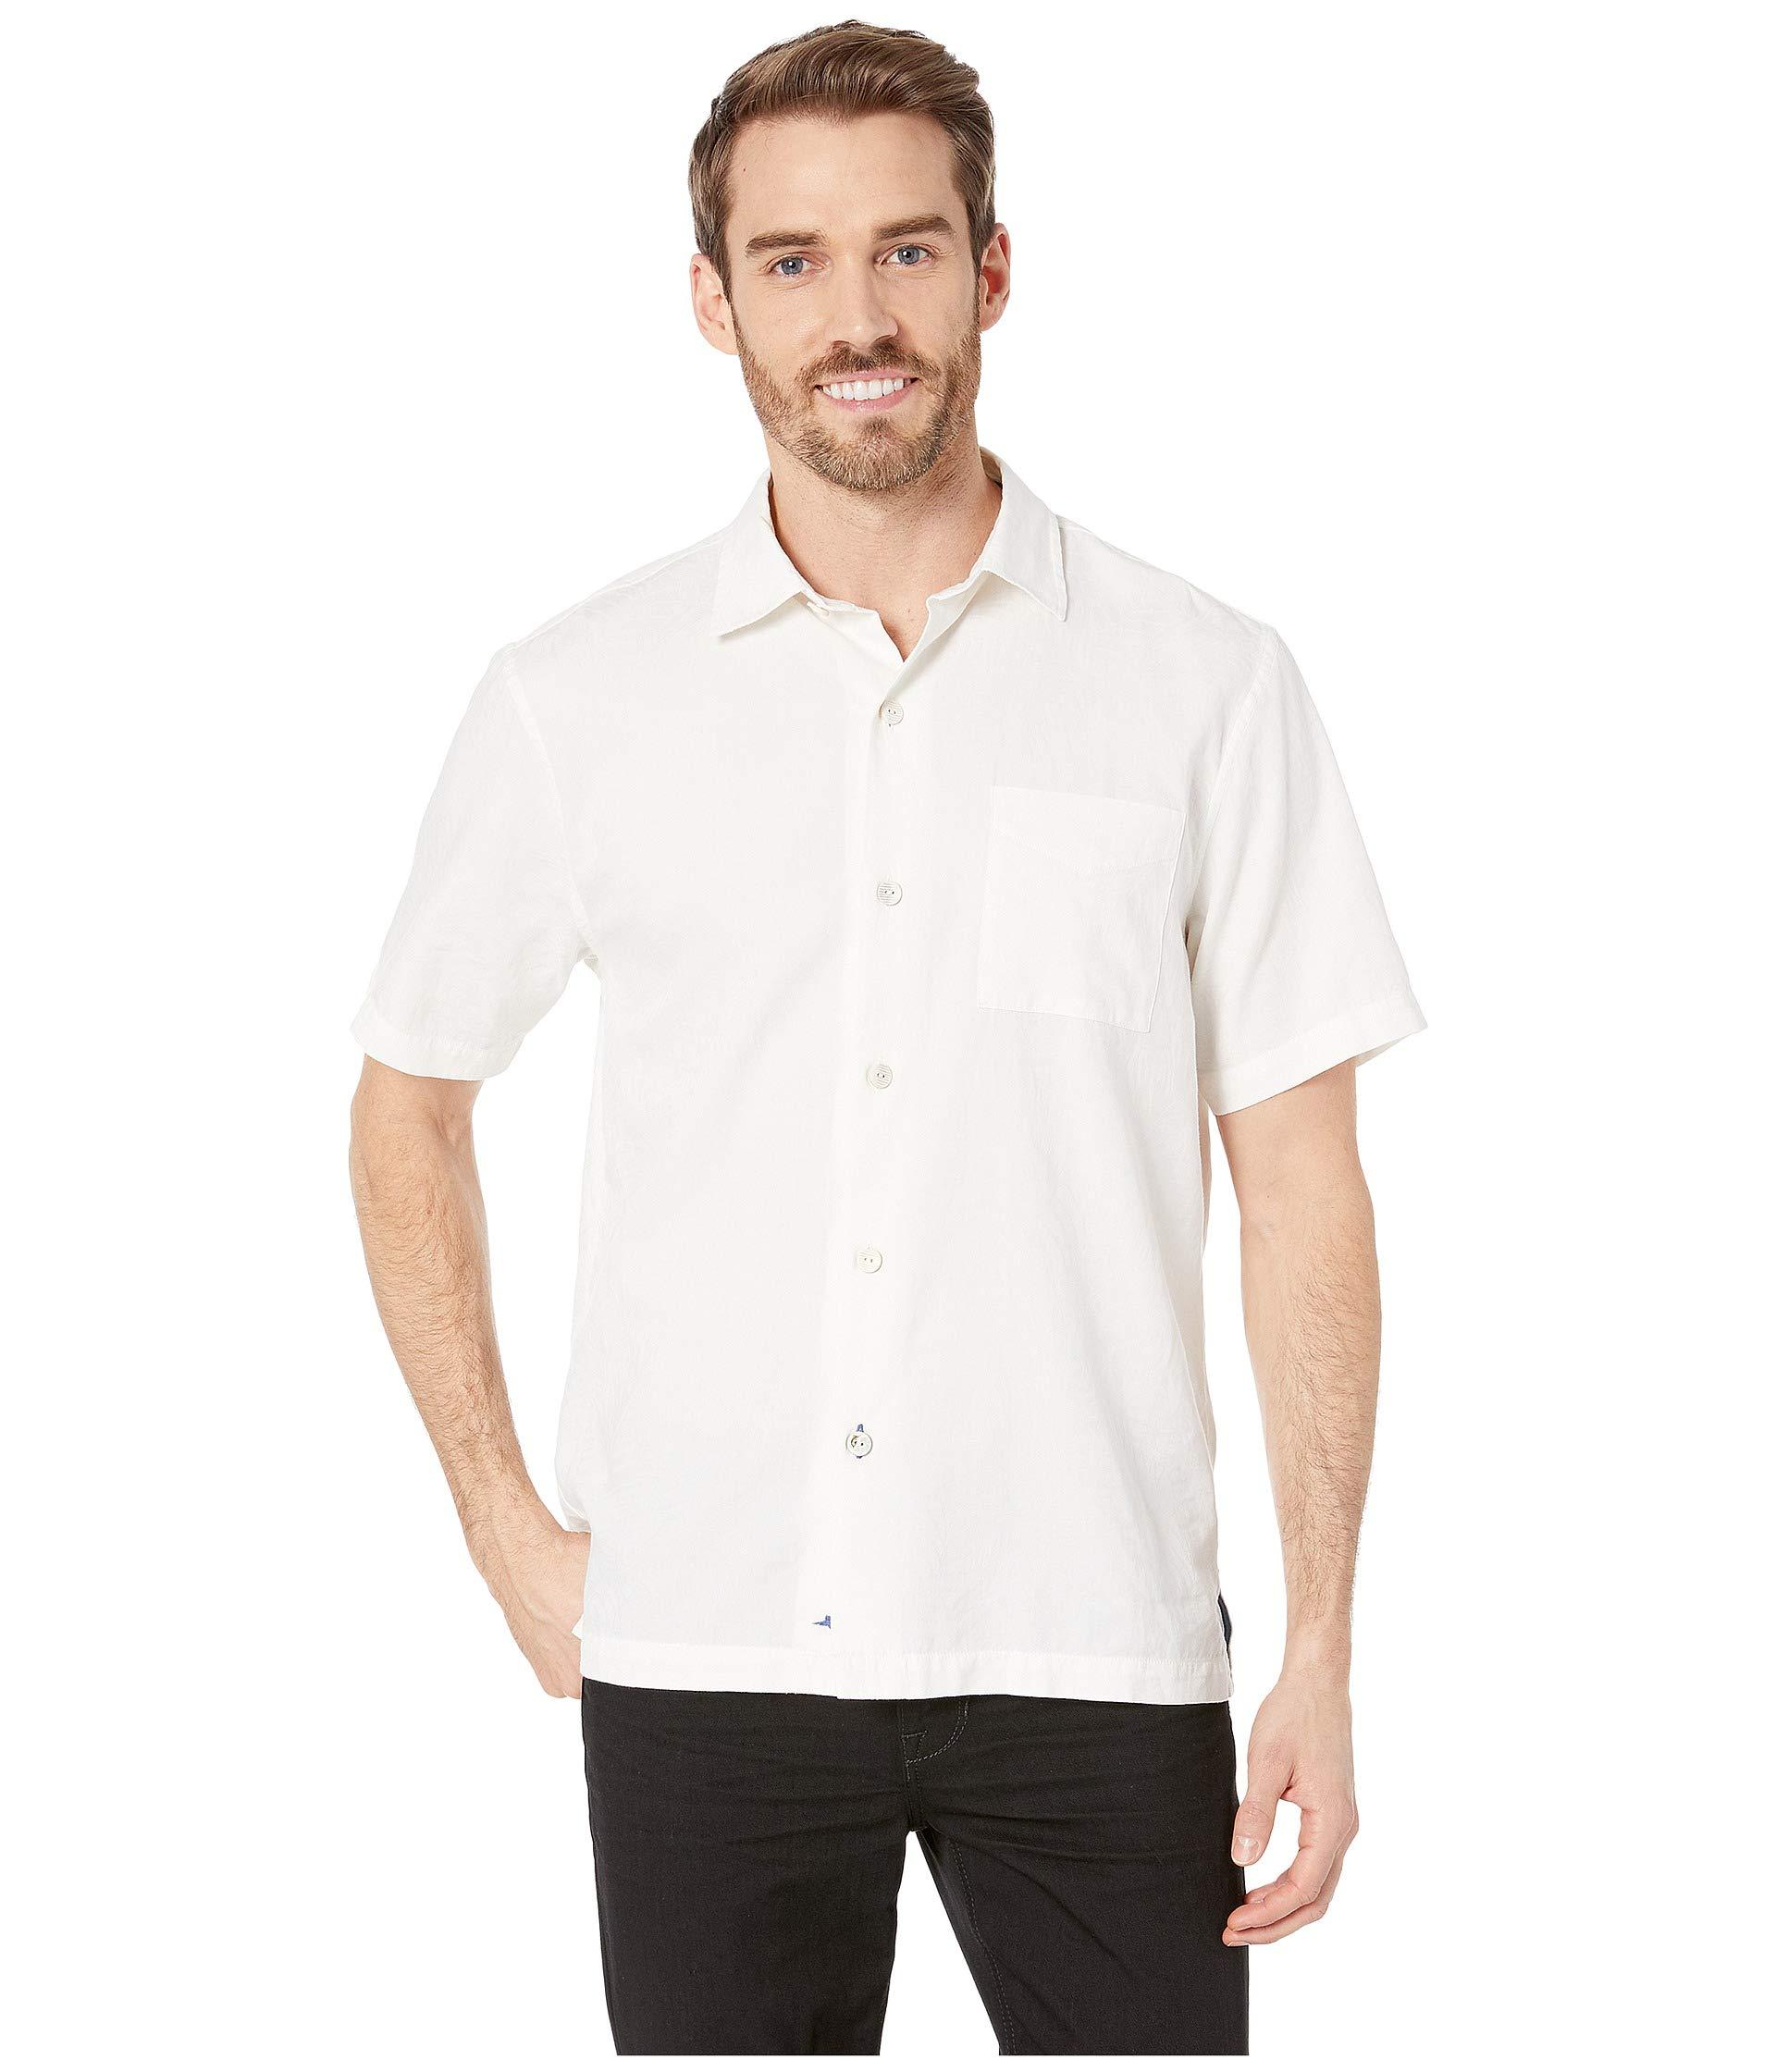 Tommy Bahama Cotton Camden Coast Shirt in White for Men - Lyst